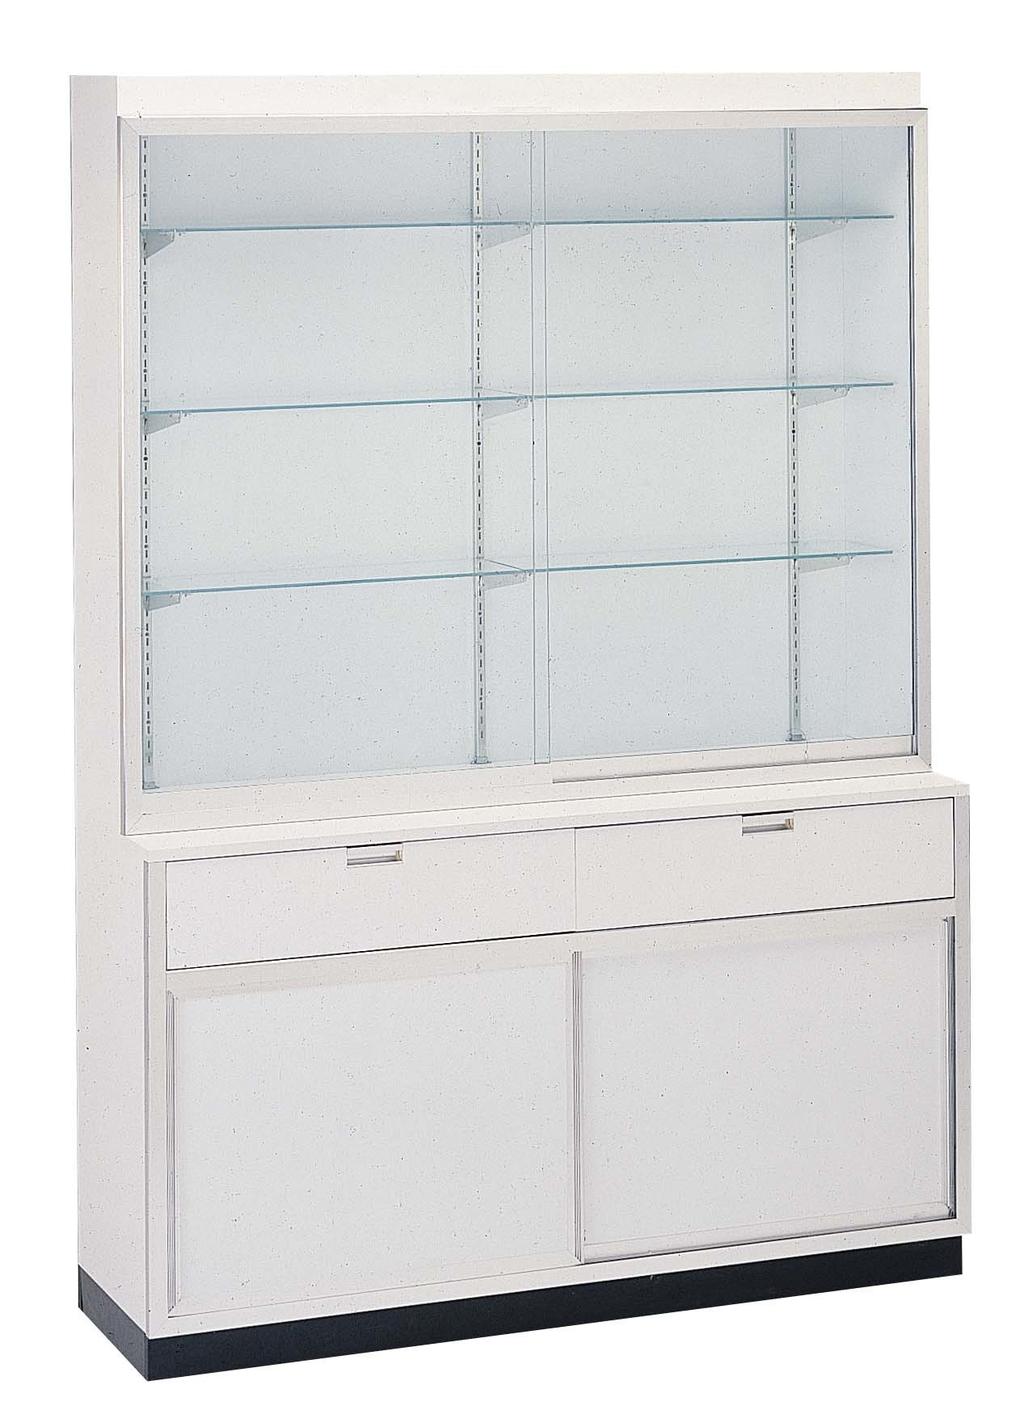 WL2550 Series Wall Display Showcase (with Ledge & Drawers) Standard Specifications Laminated Front, Ends, and Interior Finish (TFM) 1/4 Tempered Glass Shelves 3-12